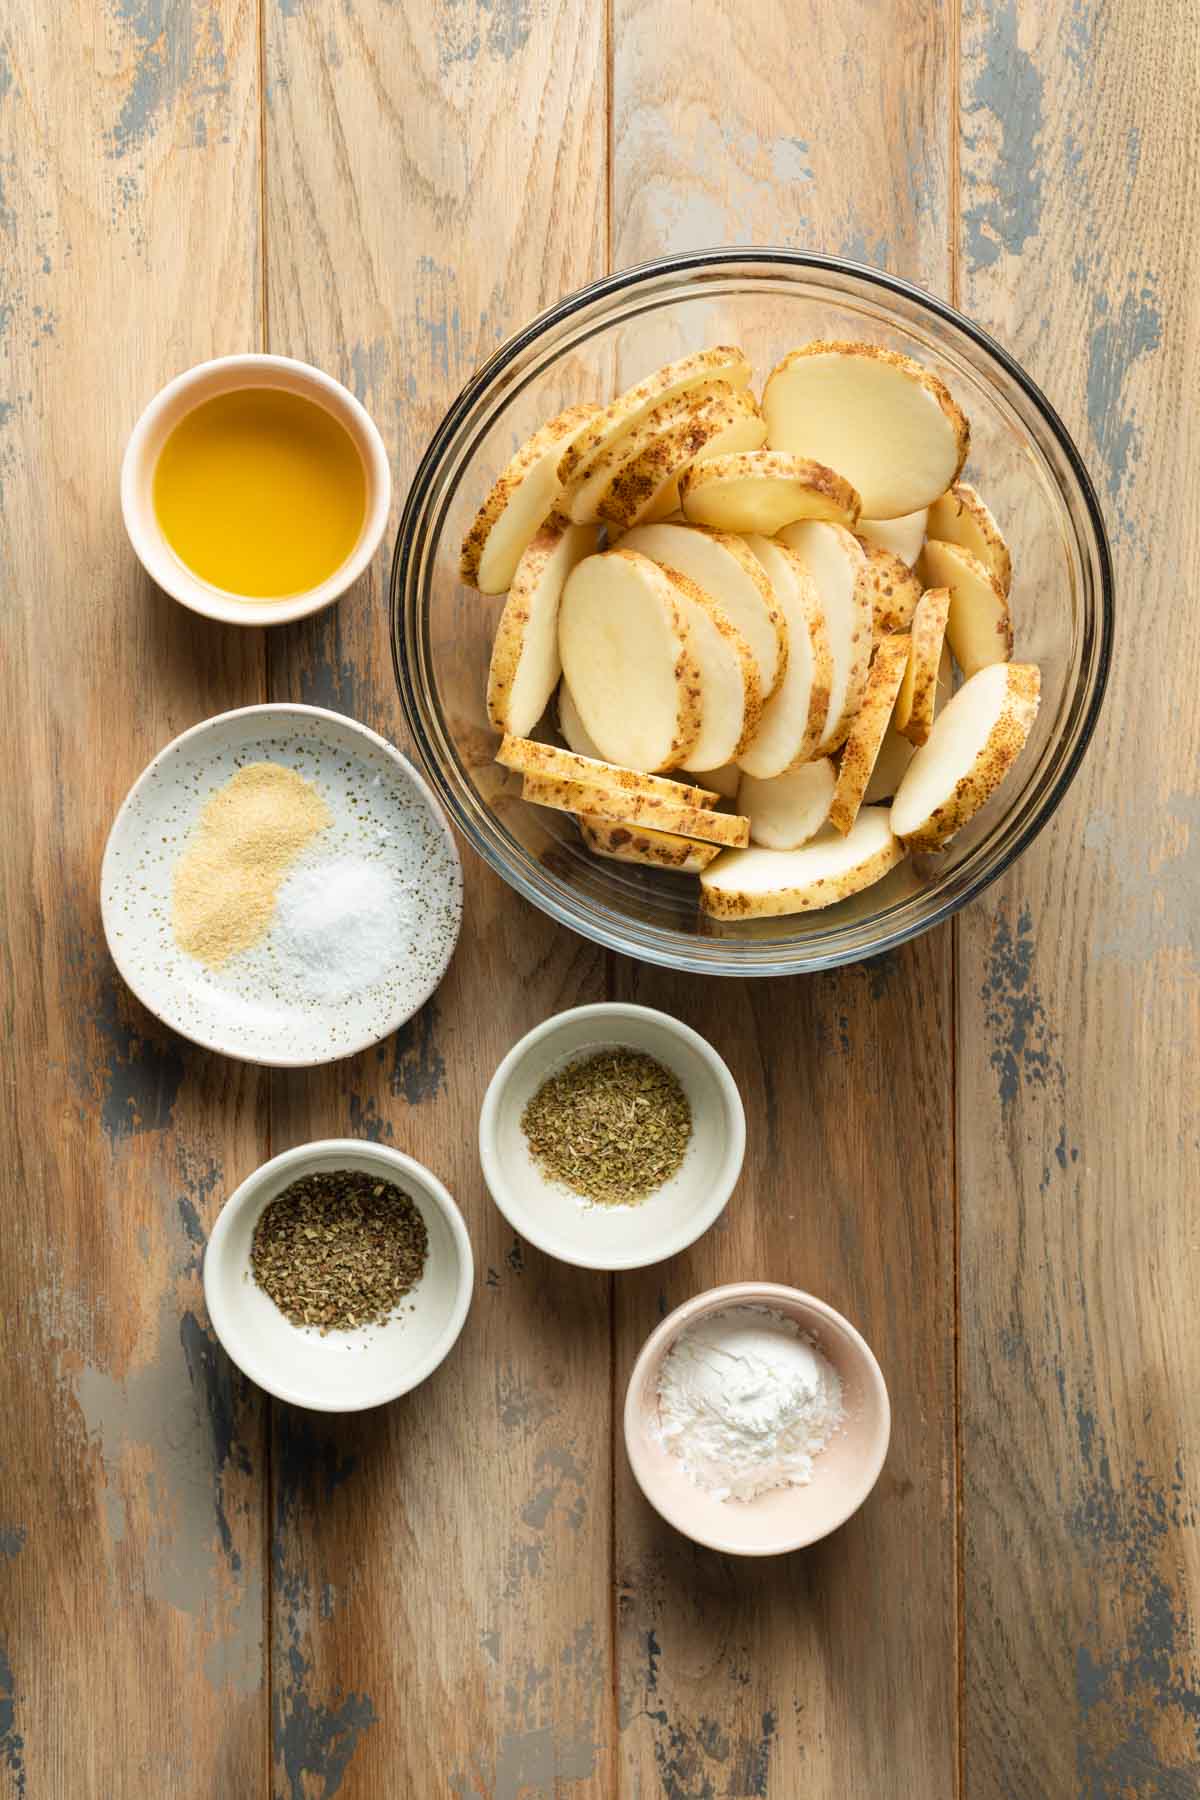 Ingredients to make air fryer potato slices arranged individually on a wooden surface.